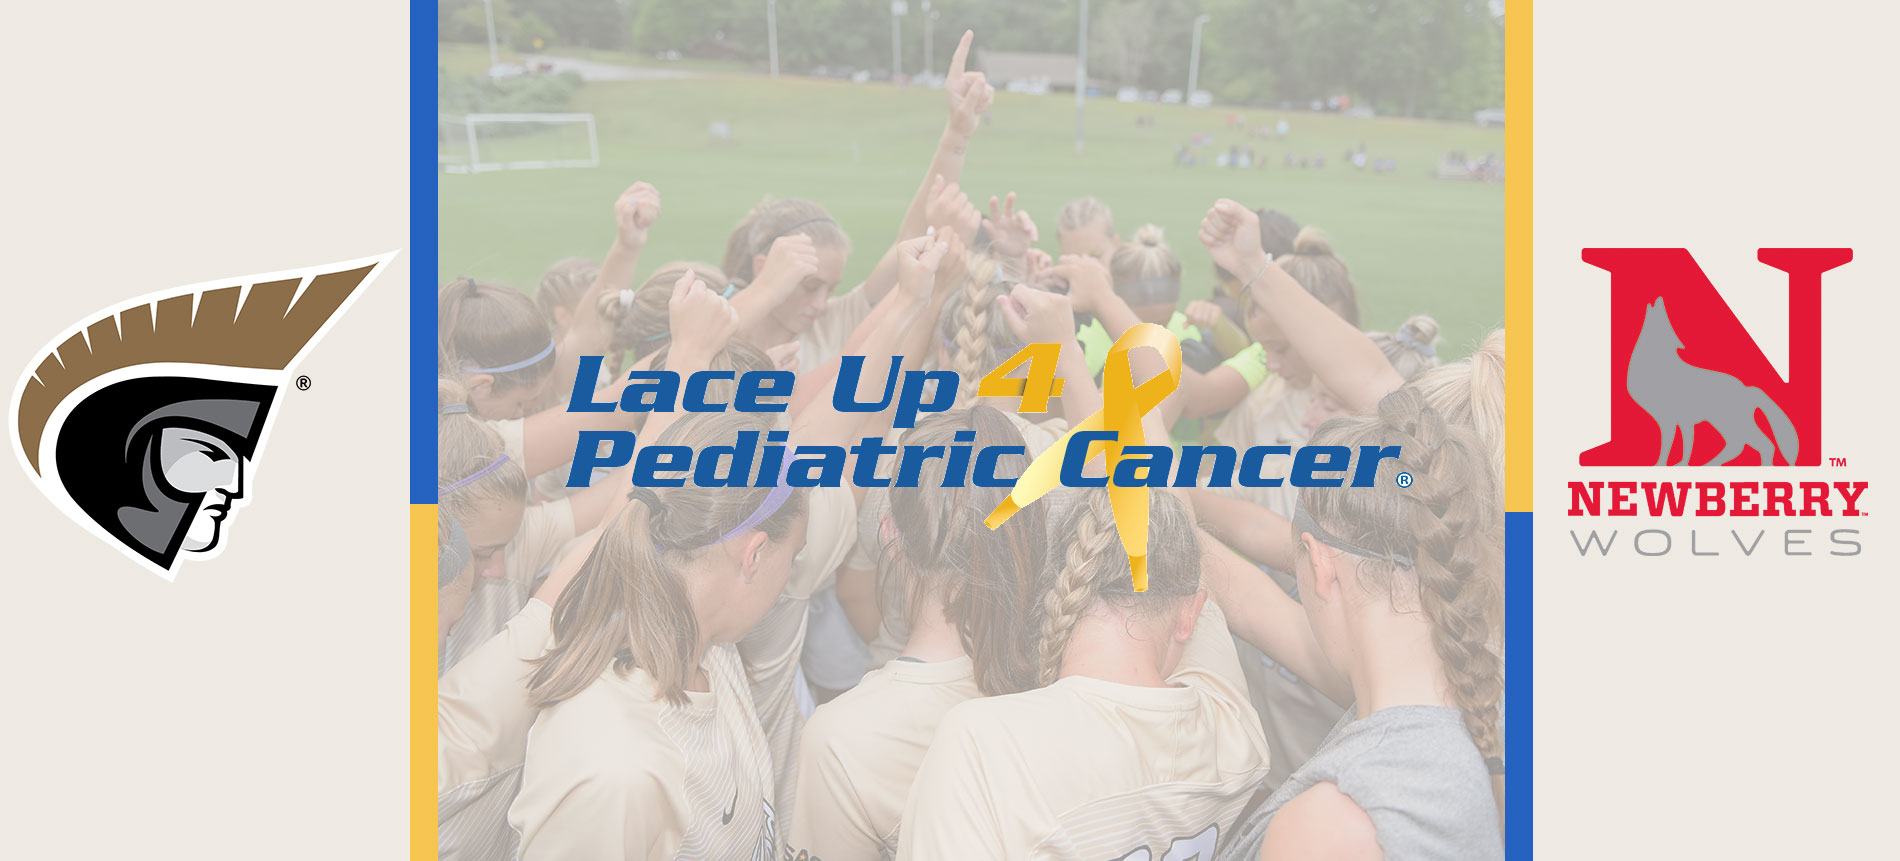 Women’s Soccer Set to Host Newberry as Both Teams Lace Up 4 Pediatric Cancer